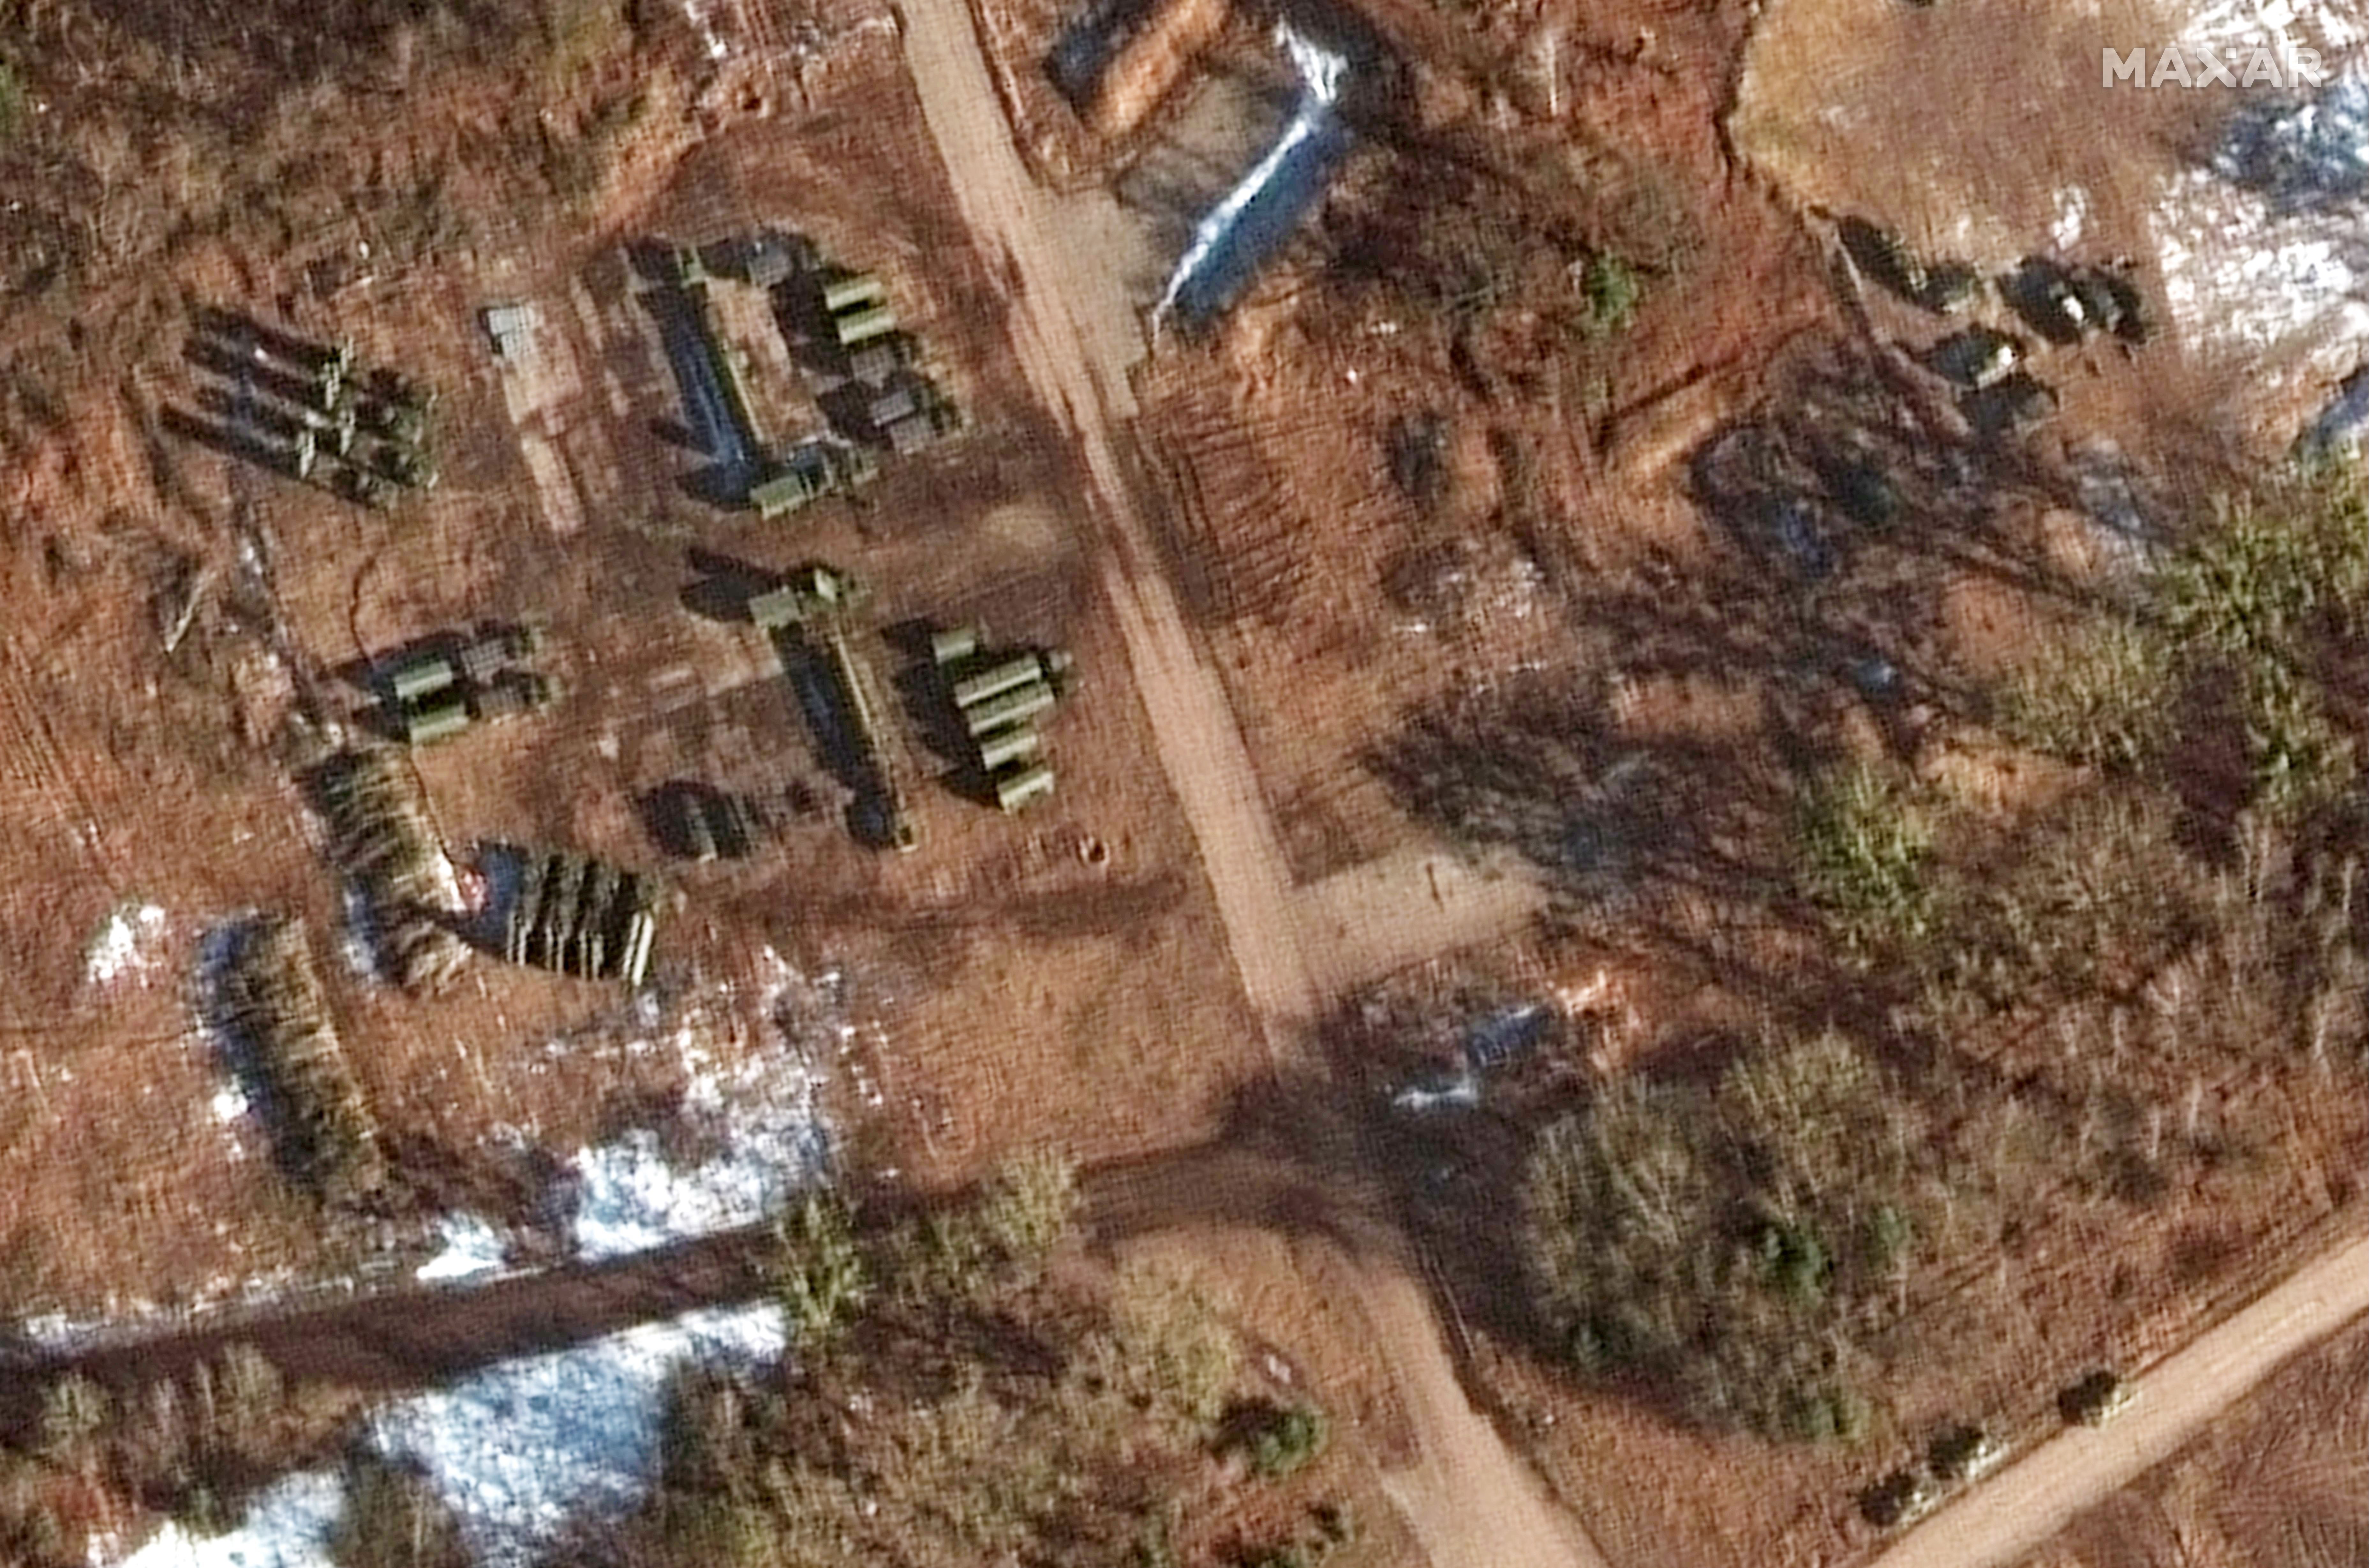 A close view of air defense units in Belarus, observed from space on Feb. 14 2022.